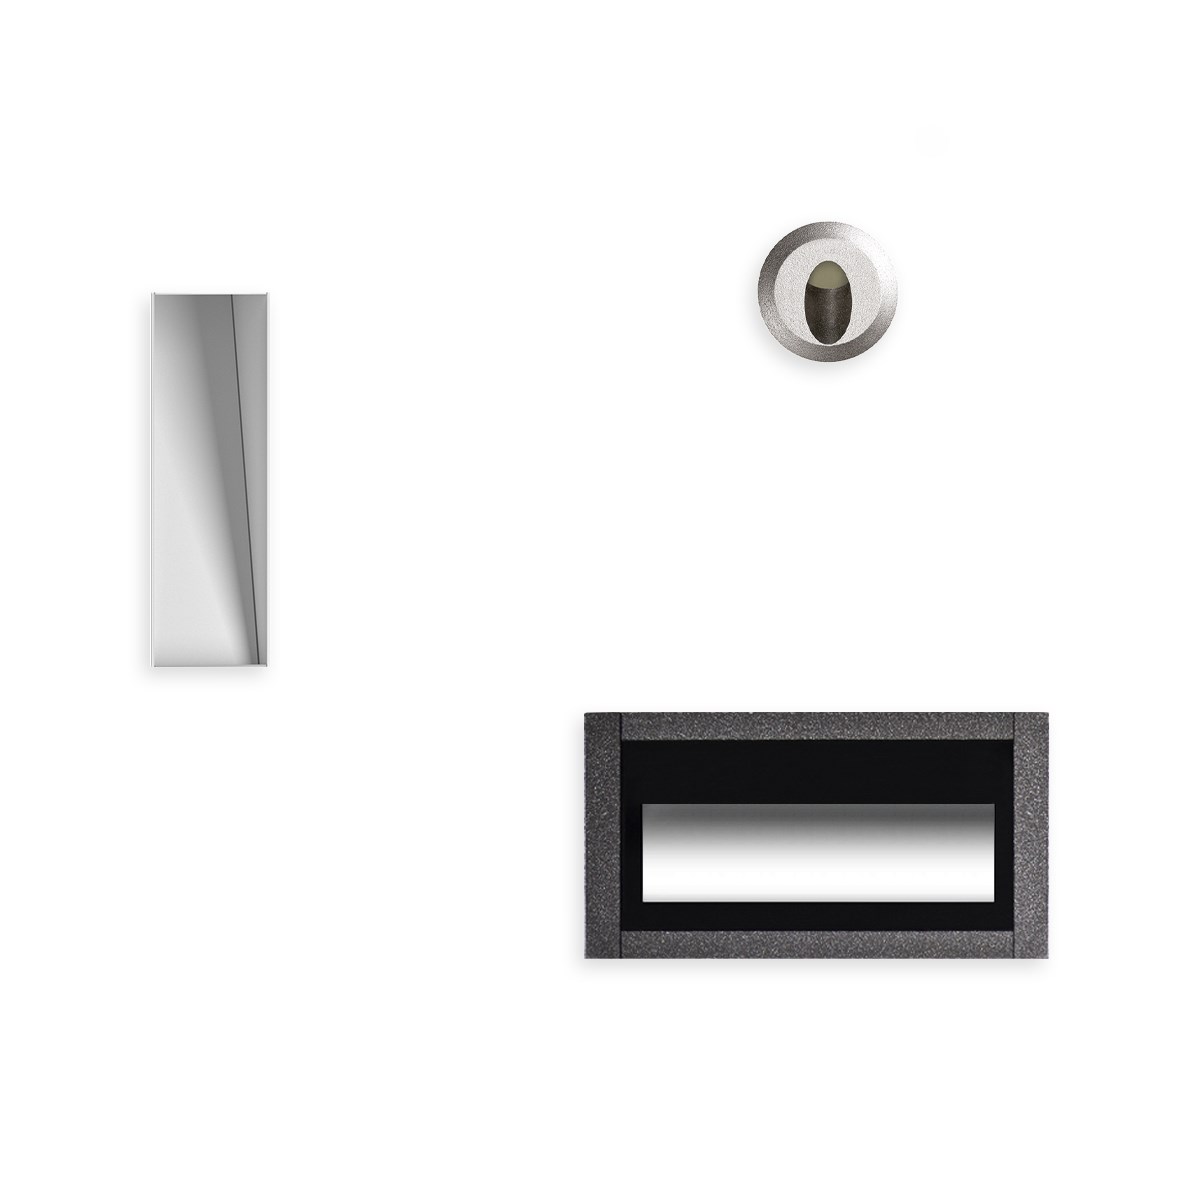 Wall recessed